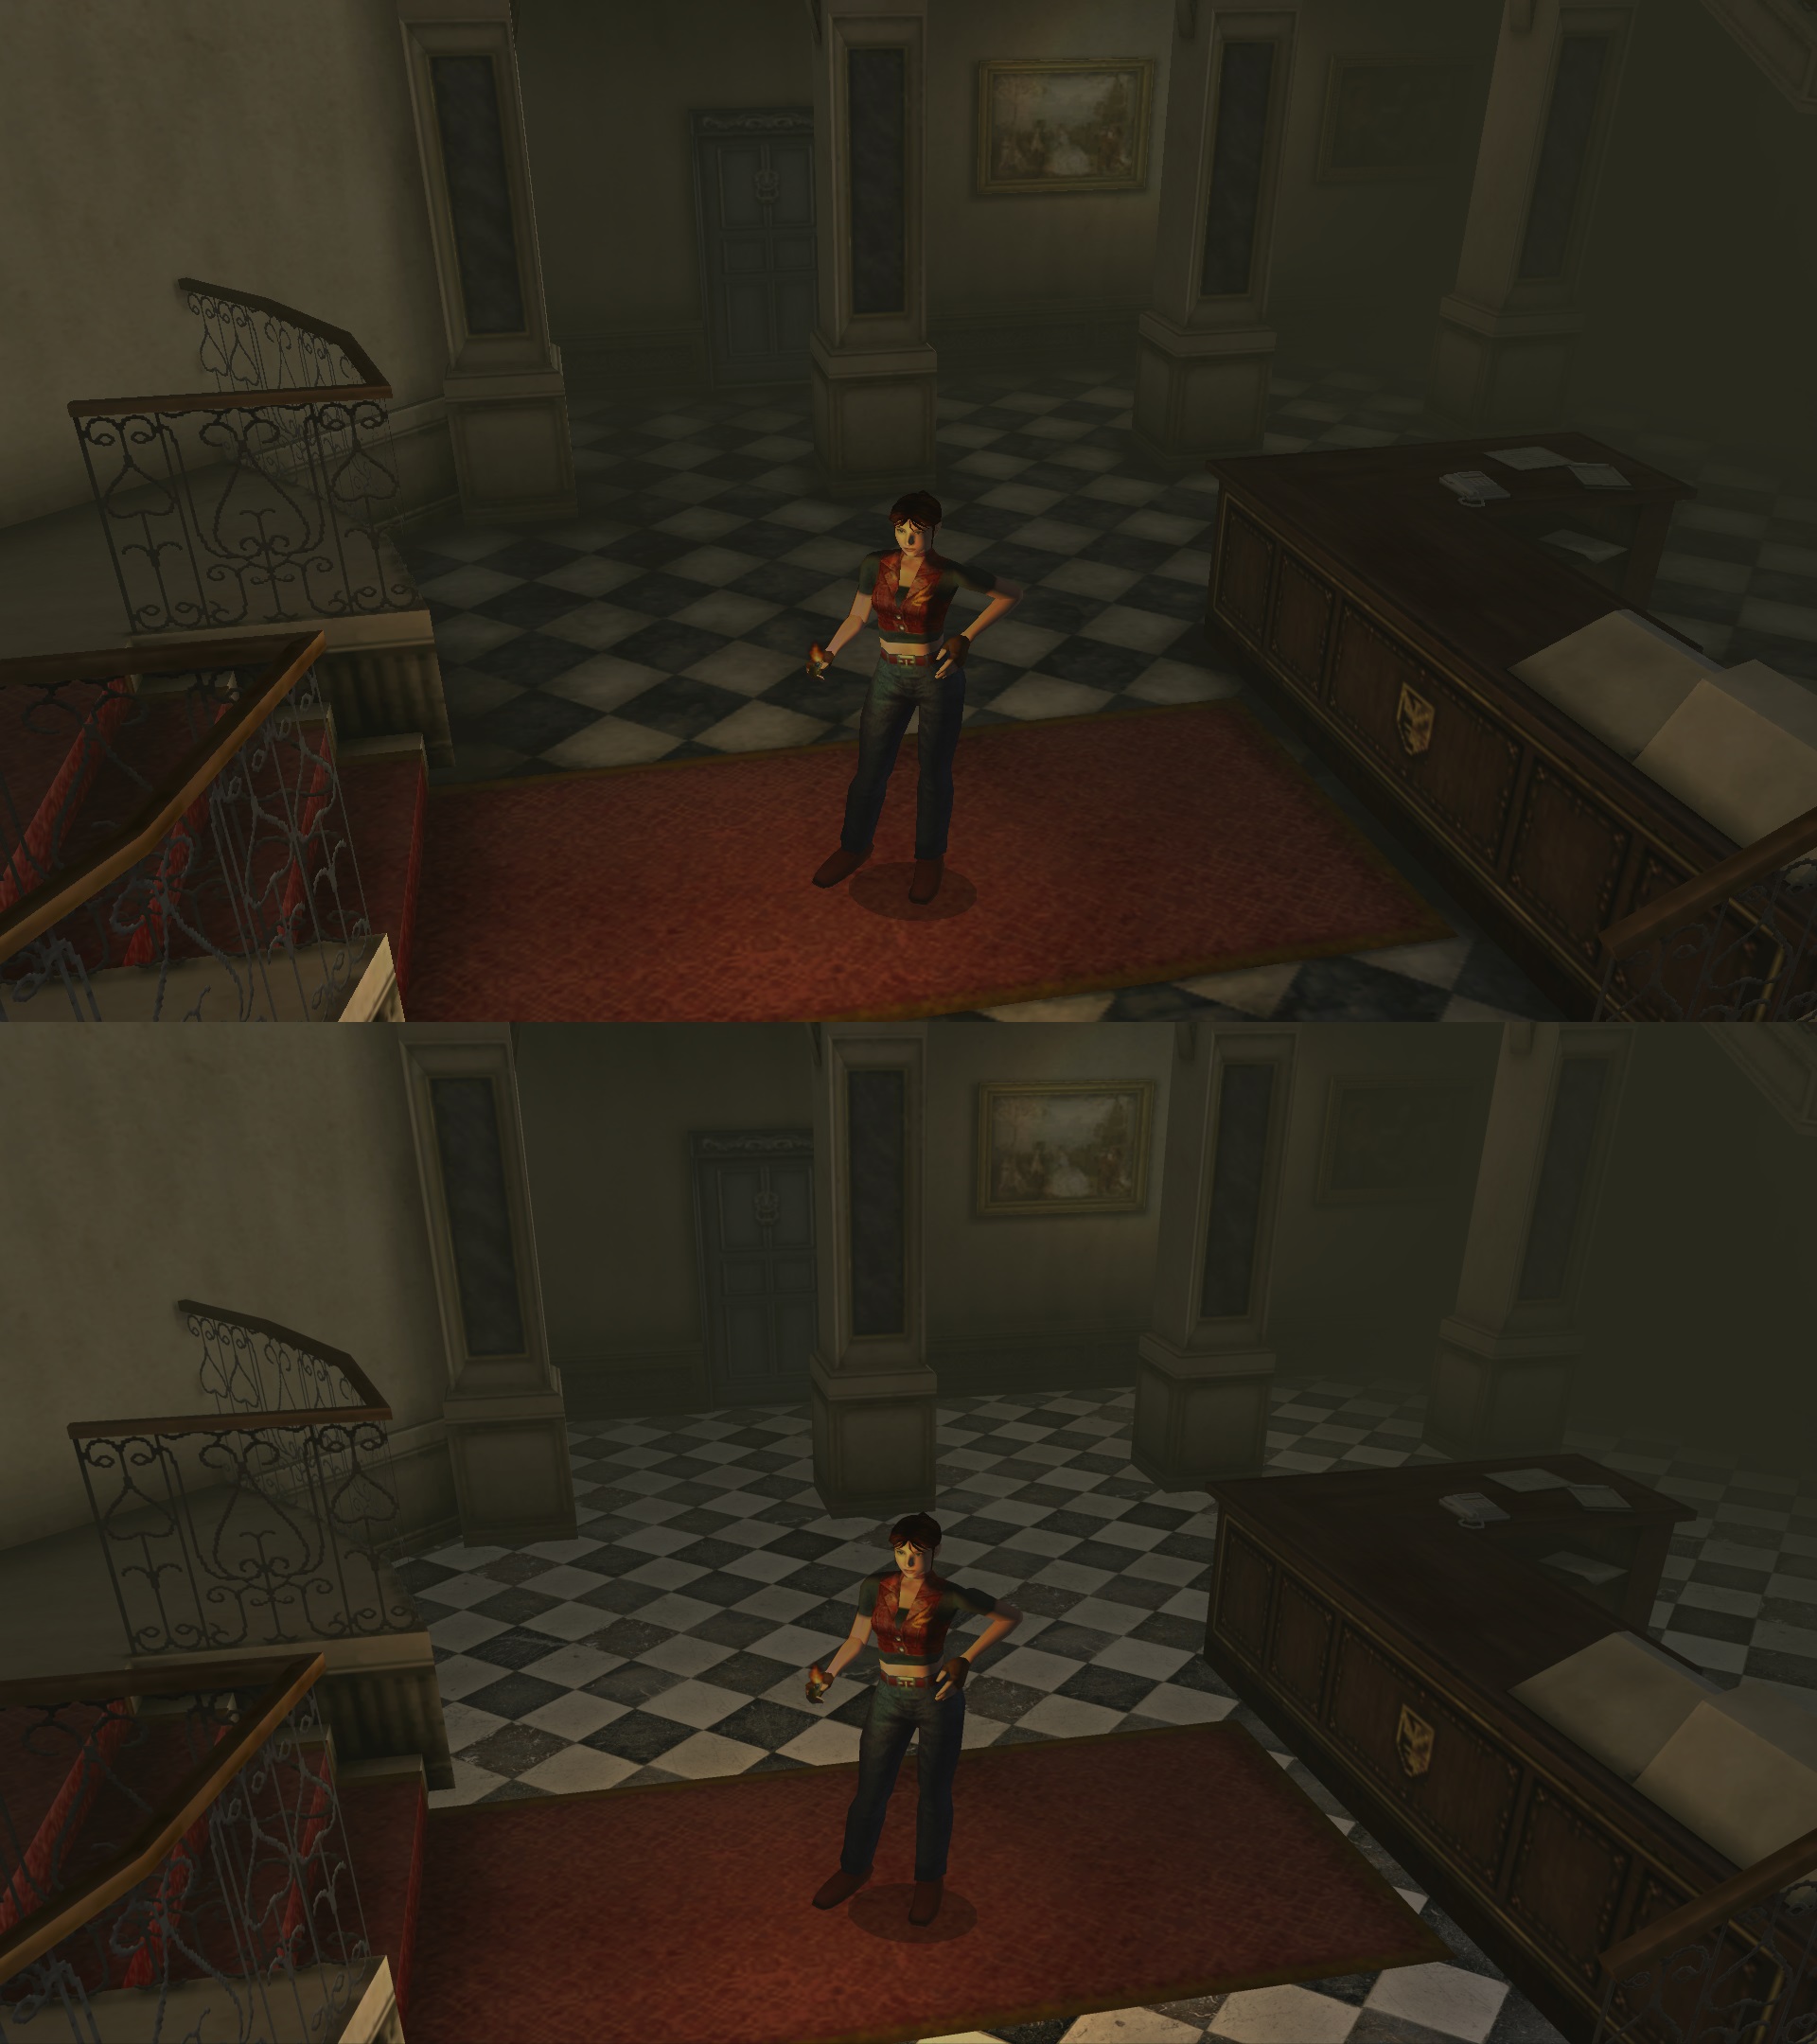 Resident Evil CODE: Veronica X - First Person Mod file - ModDB